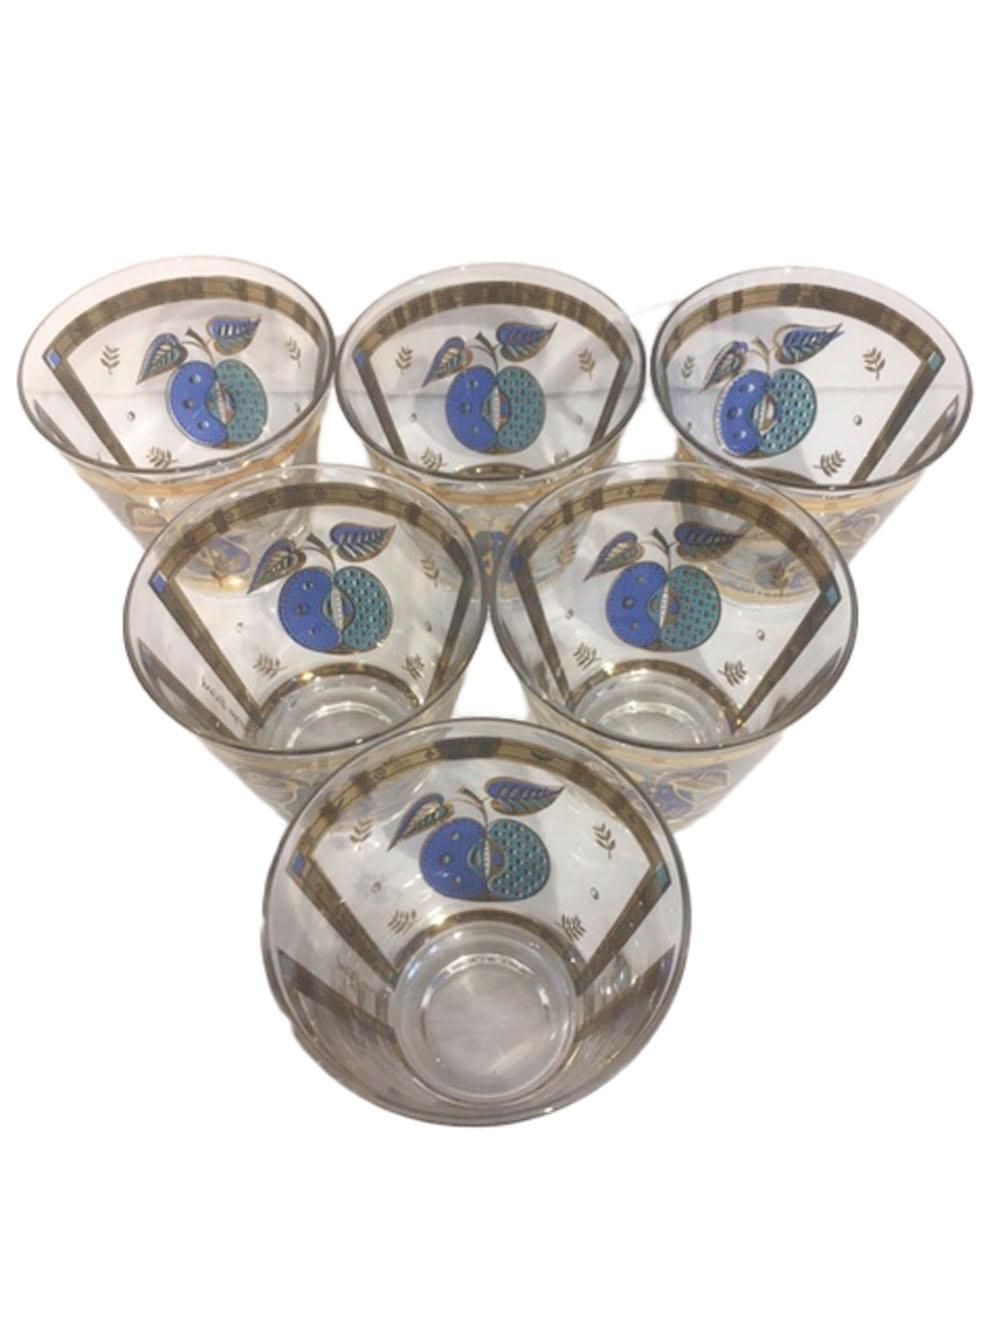 Mid-Century Modern Vintage Old Fashioned Glasses by Georges Briard in the Forbidden Fruit Pattern